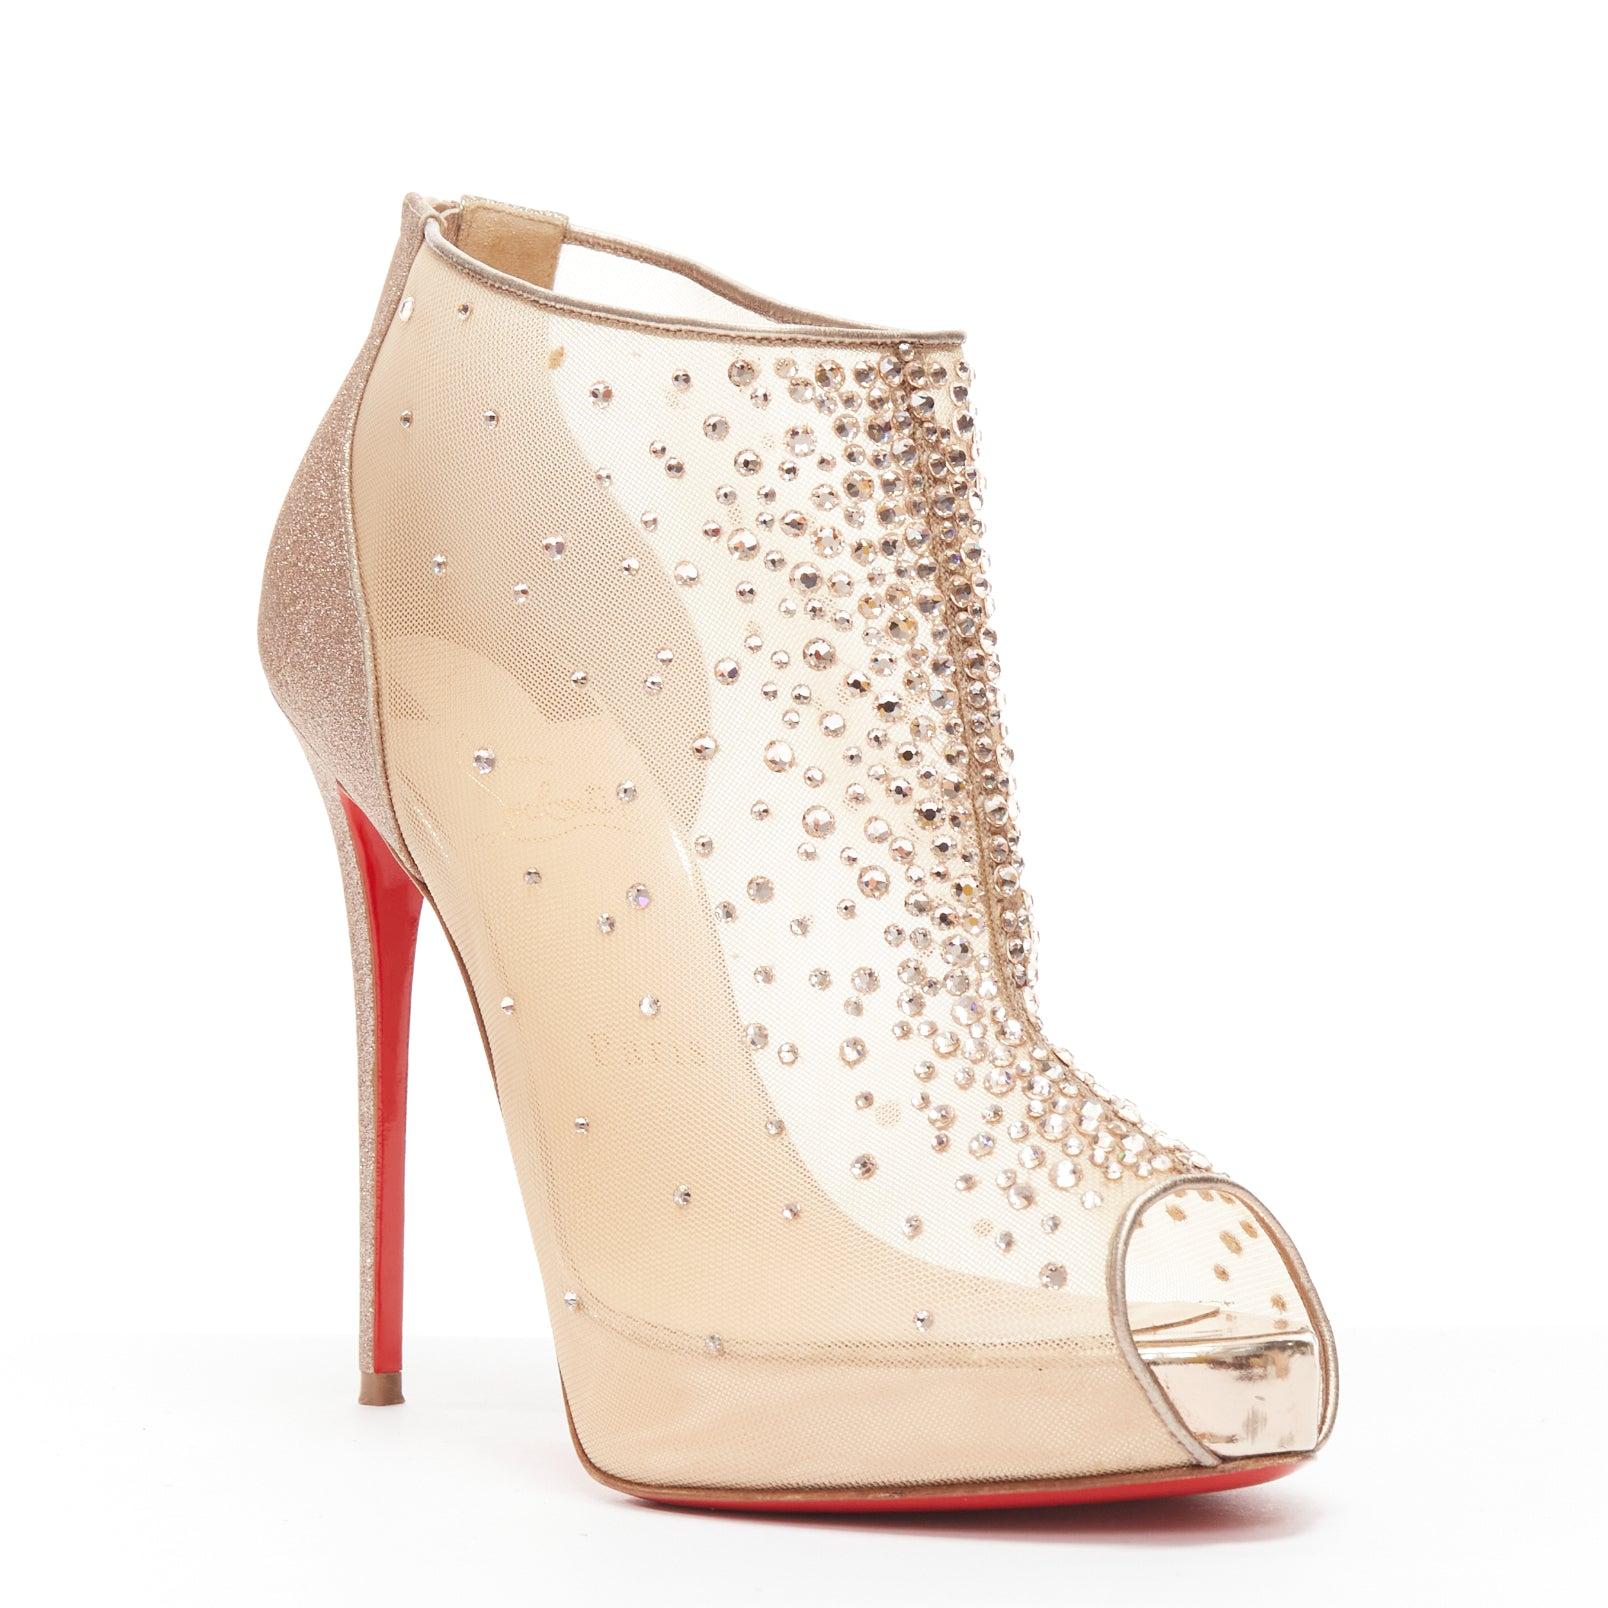 CHRISTIAN LOUBOUTIN nude copper strass crystal peep toe platform bootie EU38
Reference: TGAS/D00990
Brand: Christian Louboutin
Material: Mesh, Leather
Color: Nude, Rose Gold
Pattern: Solid
Closure: Zip
Lining: Brown Leather
Extra Details: Mesh upper